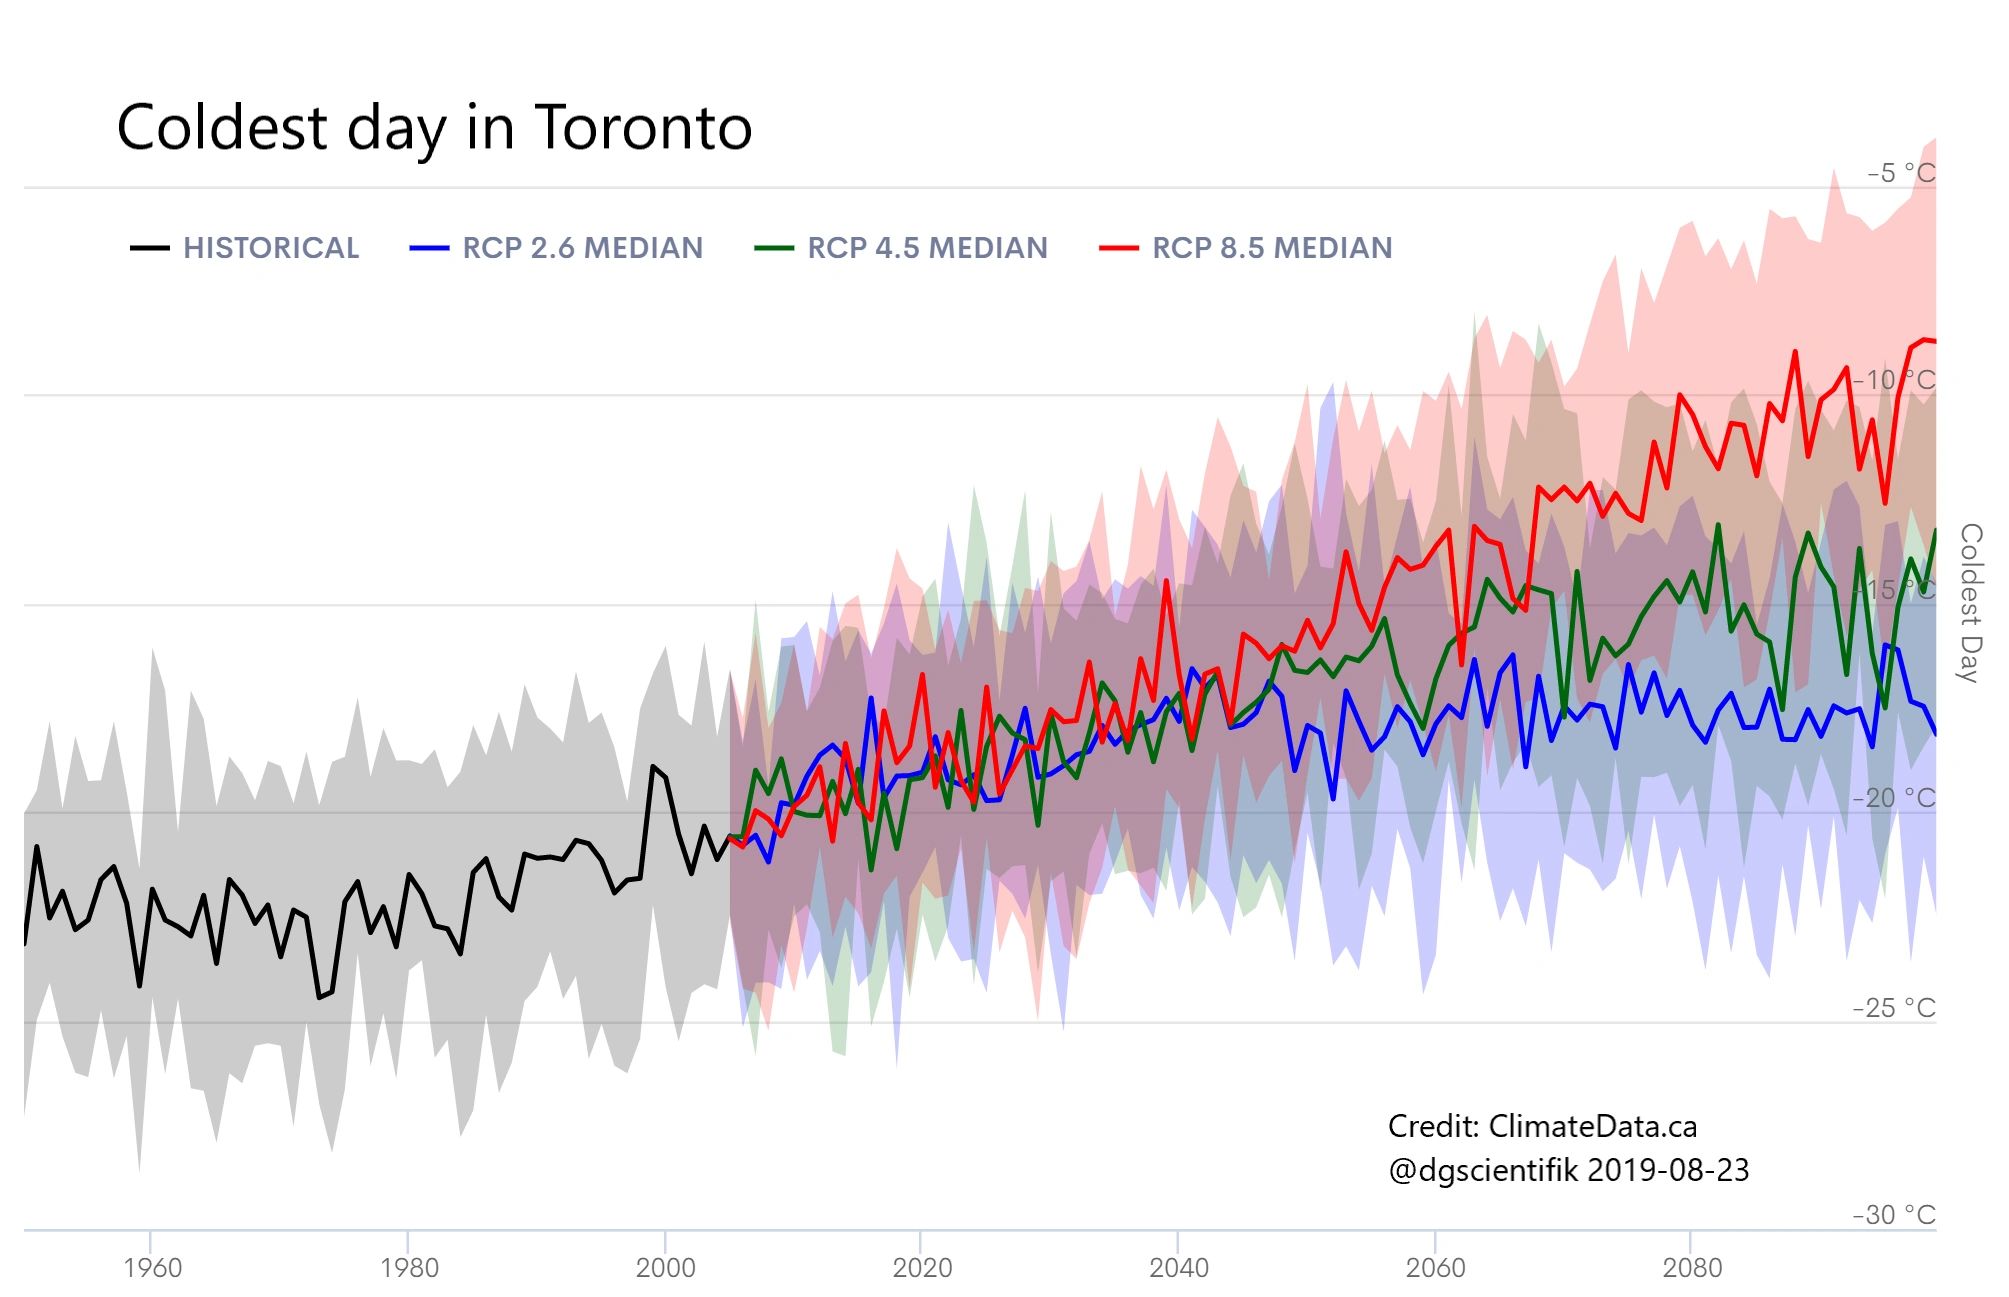 Climate projections for Toronto according to three RCP scenarios